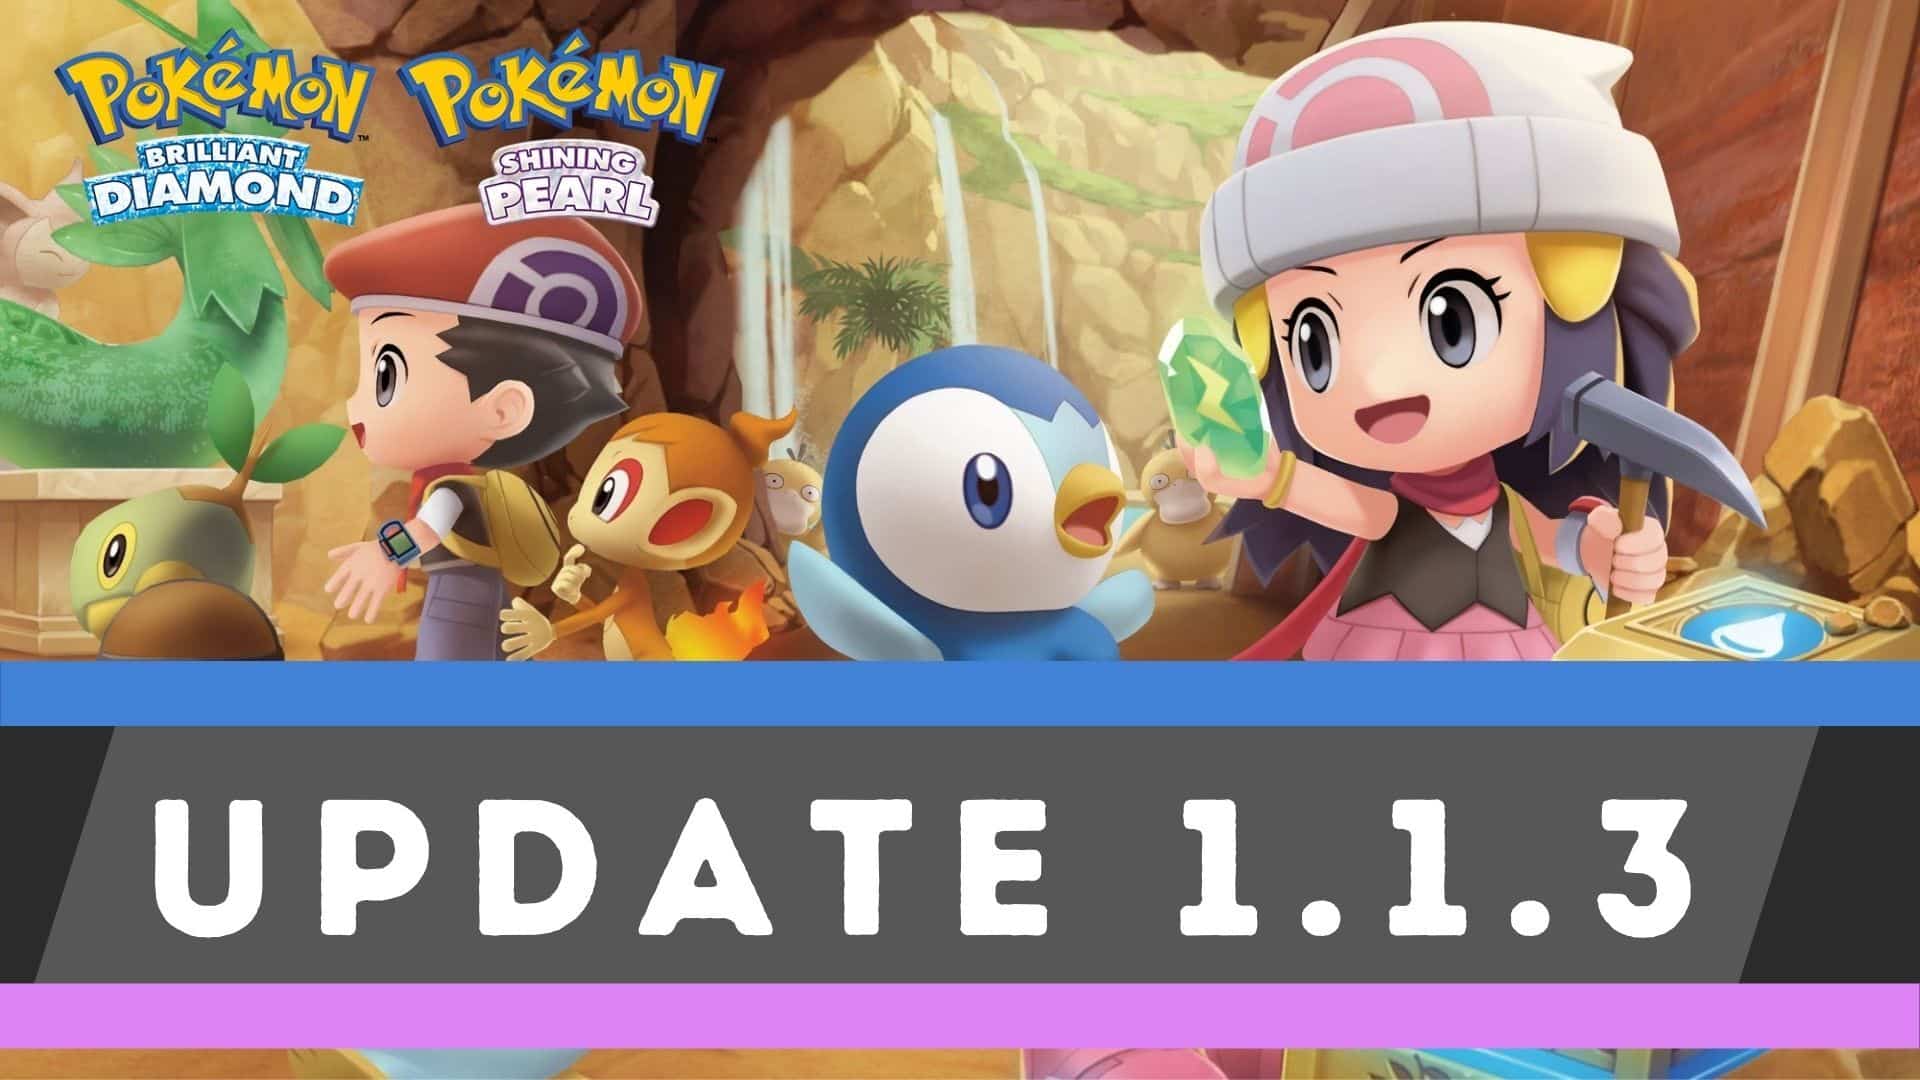 Dawn with Piplup in Pokemon Brilliant Diamond and Shining Pearl with update 1.1.3 text below